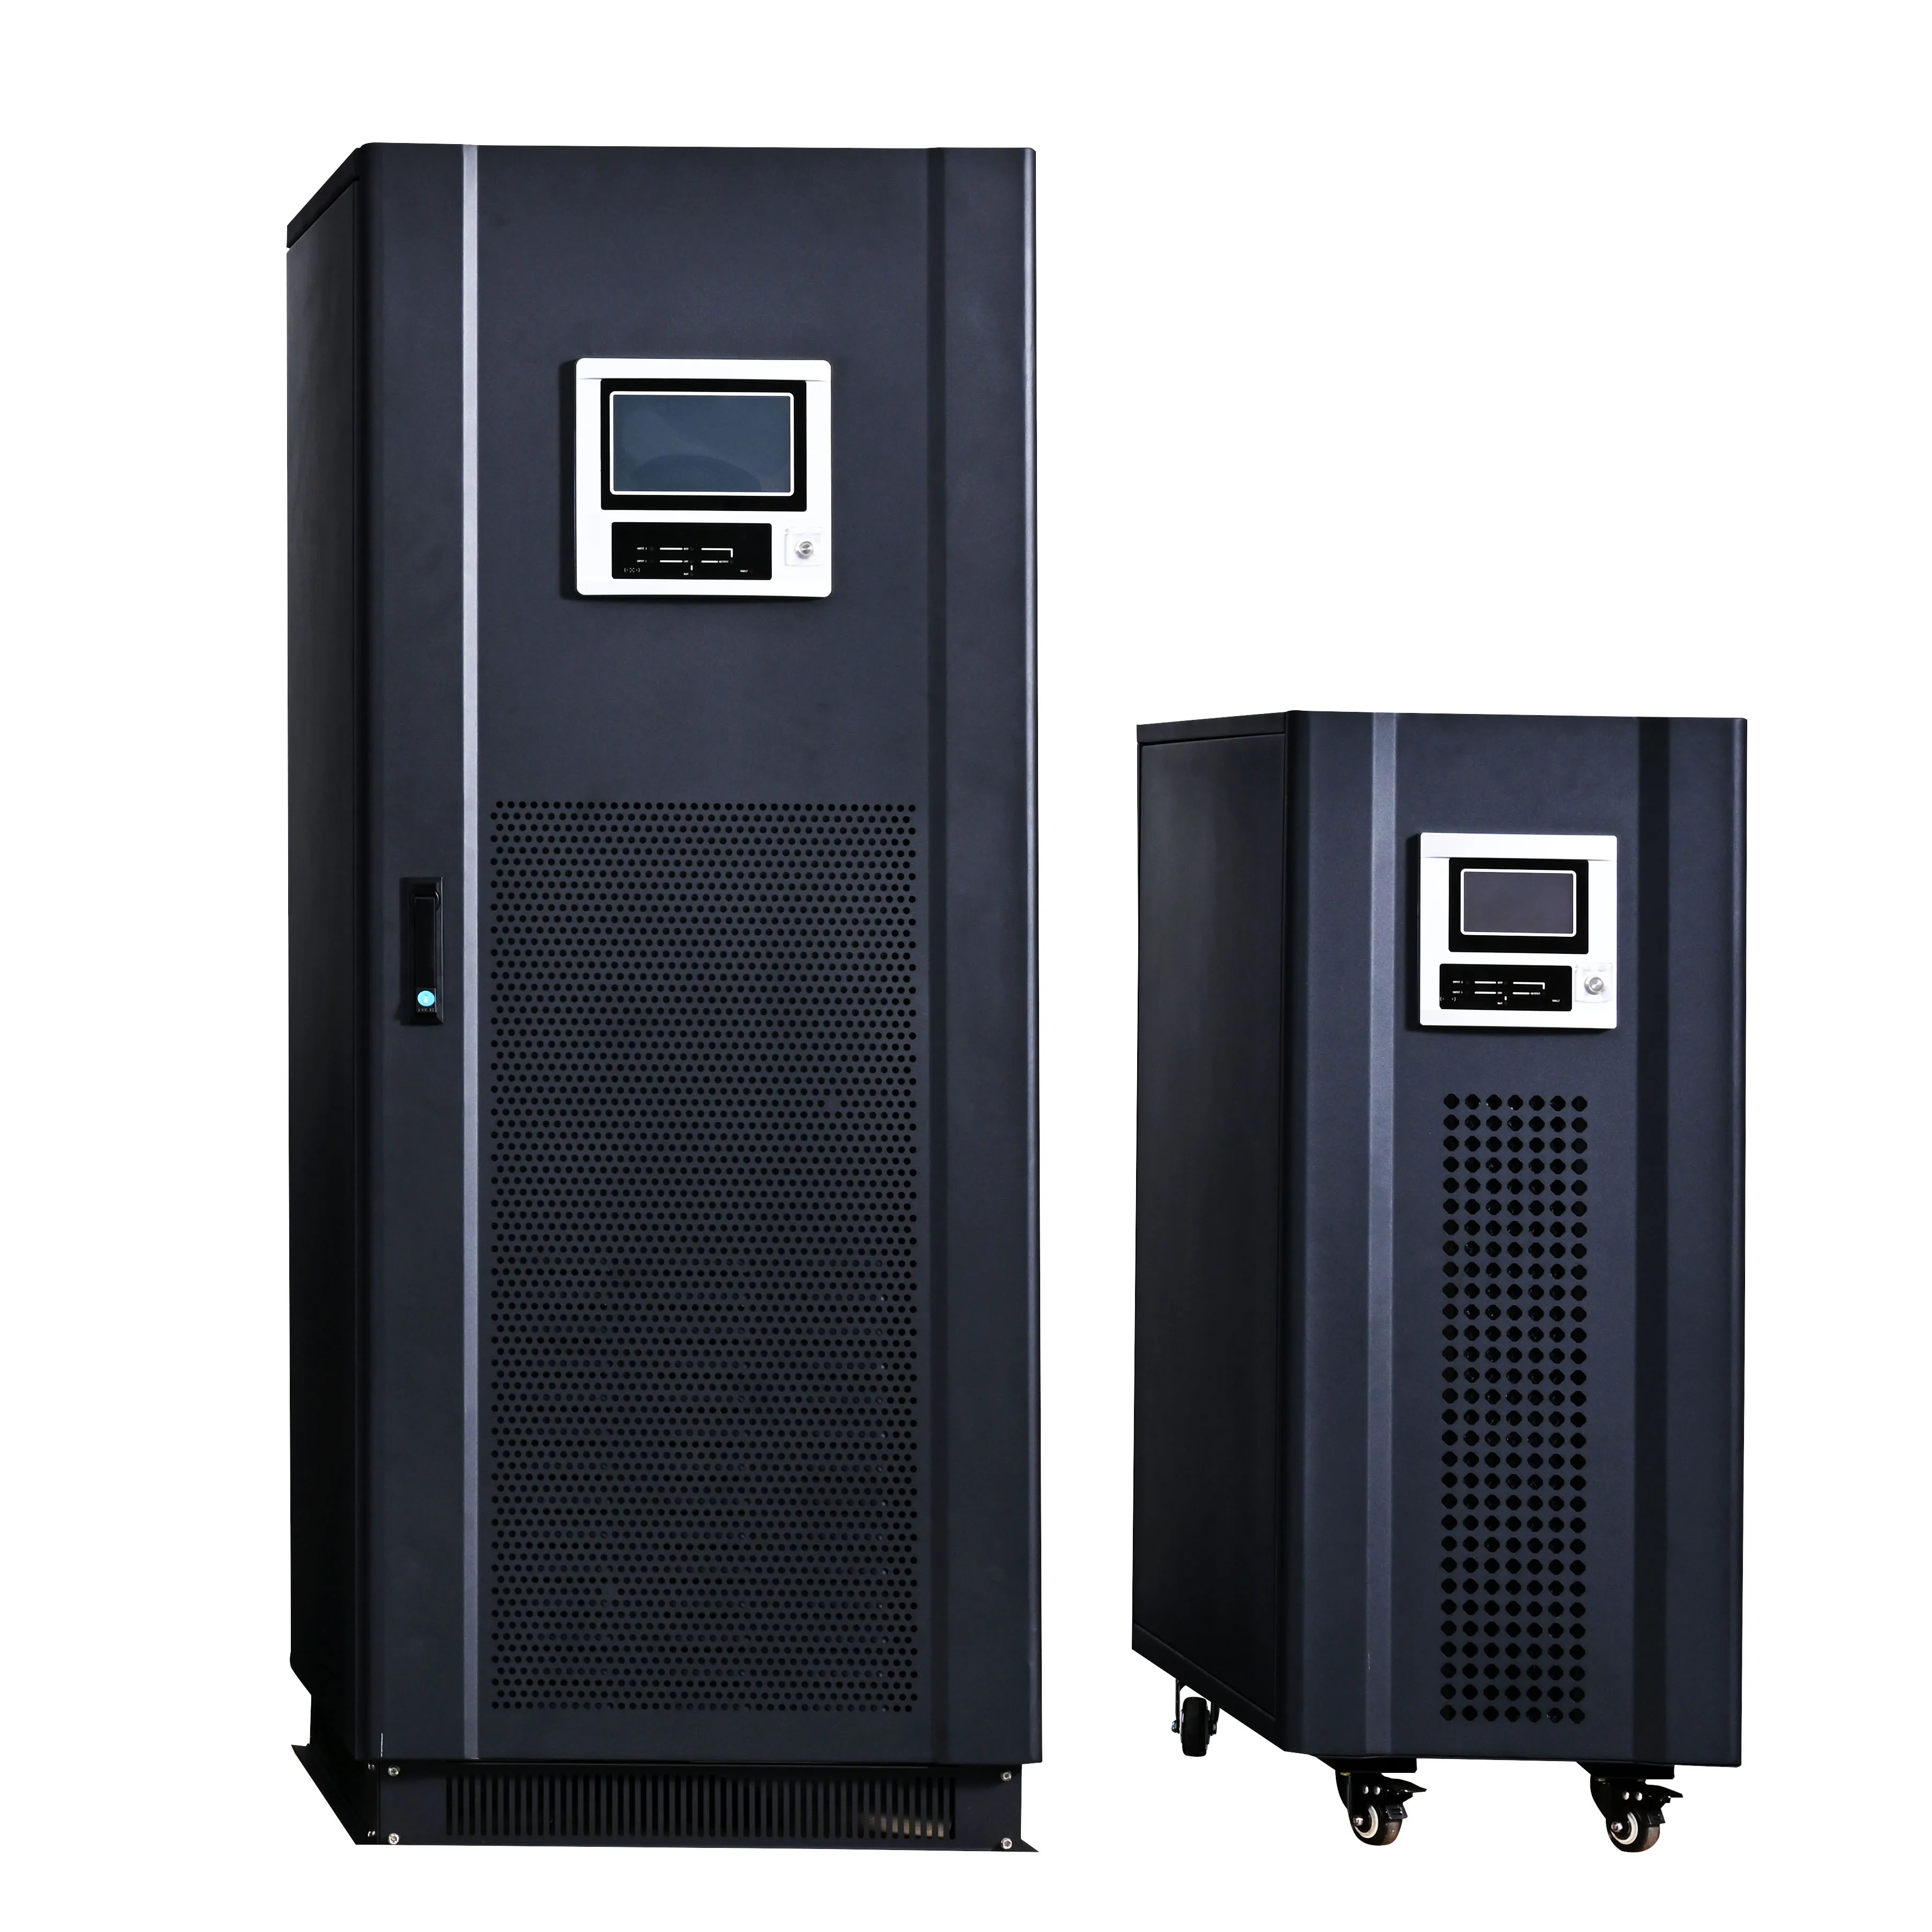 Shenzhen Low frequency Industrial ups 40kva 60kva 80kva 100KVA 120kva 160kva 200kva 300kva UPS Price